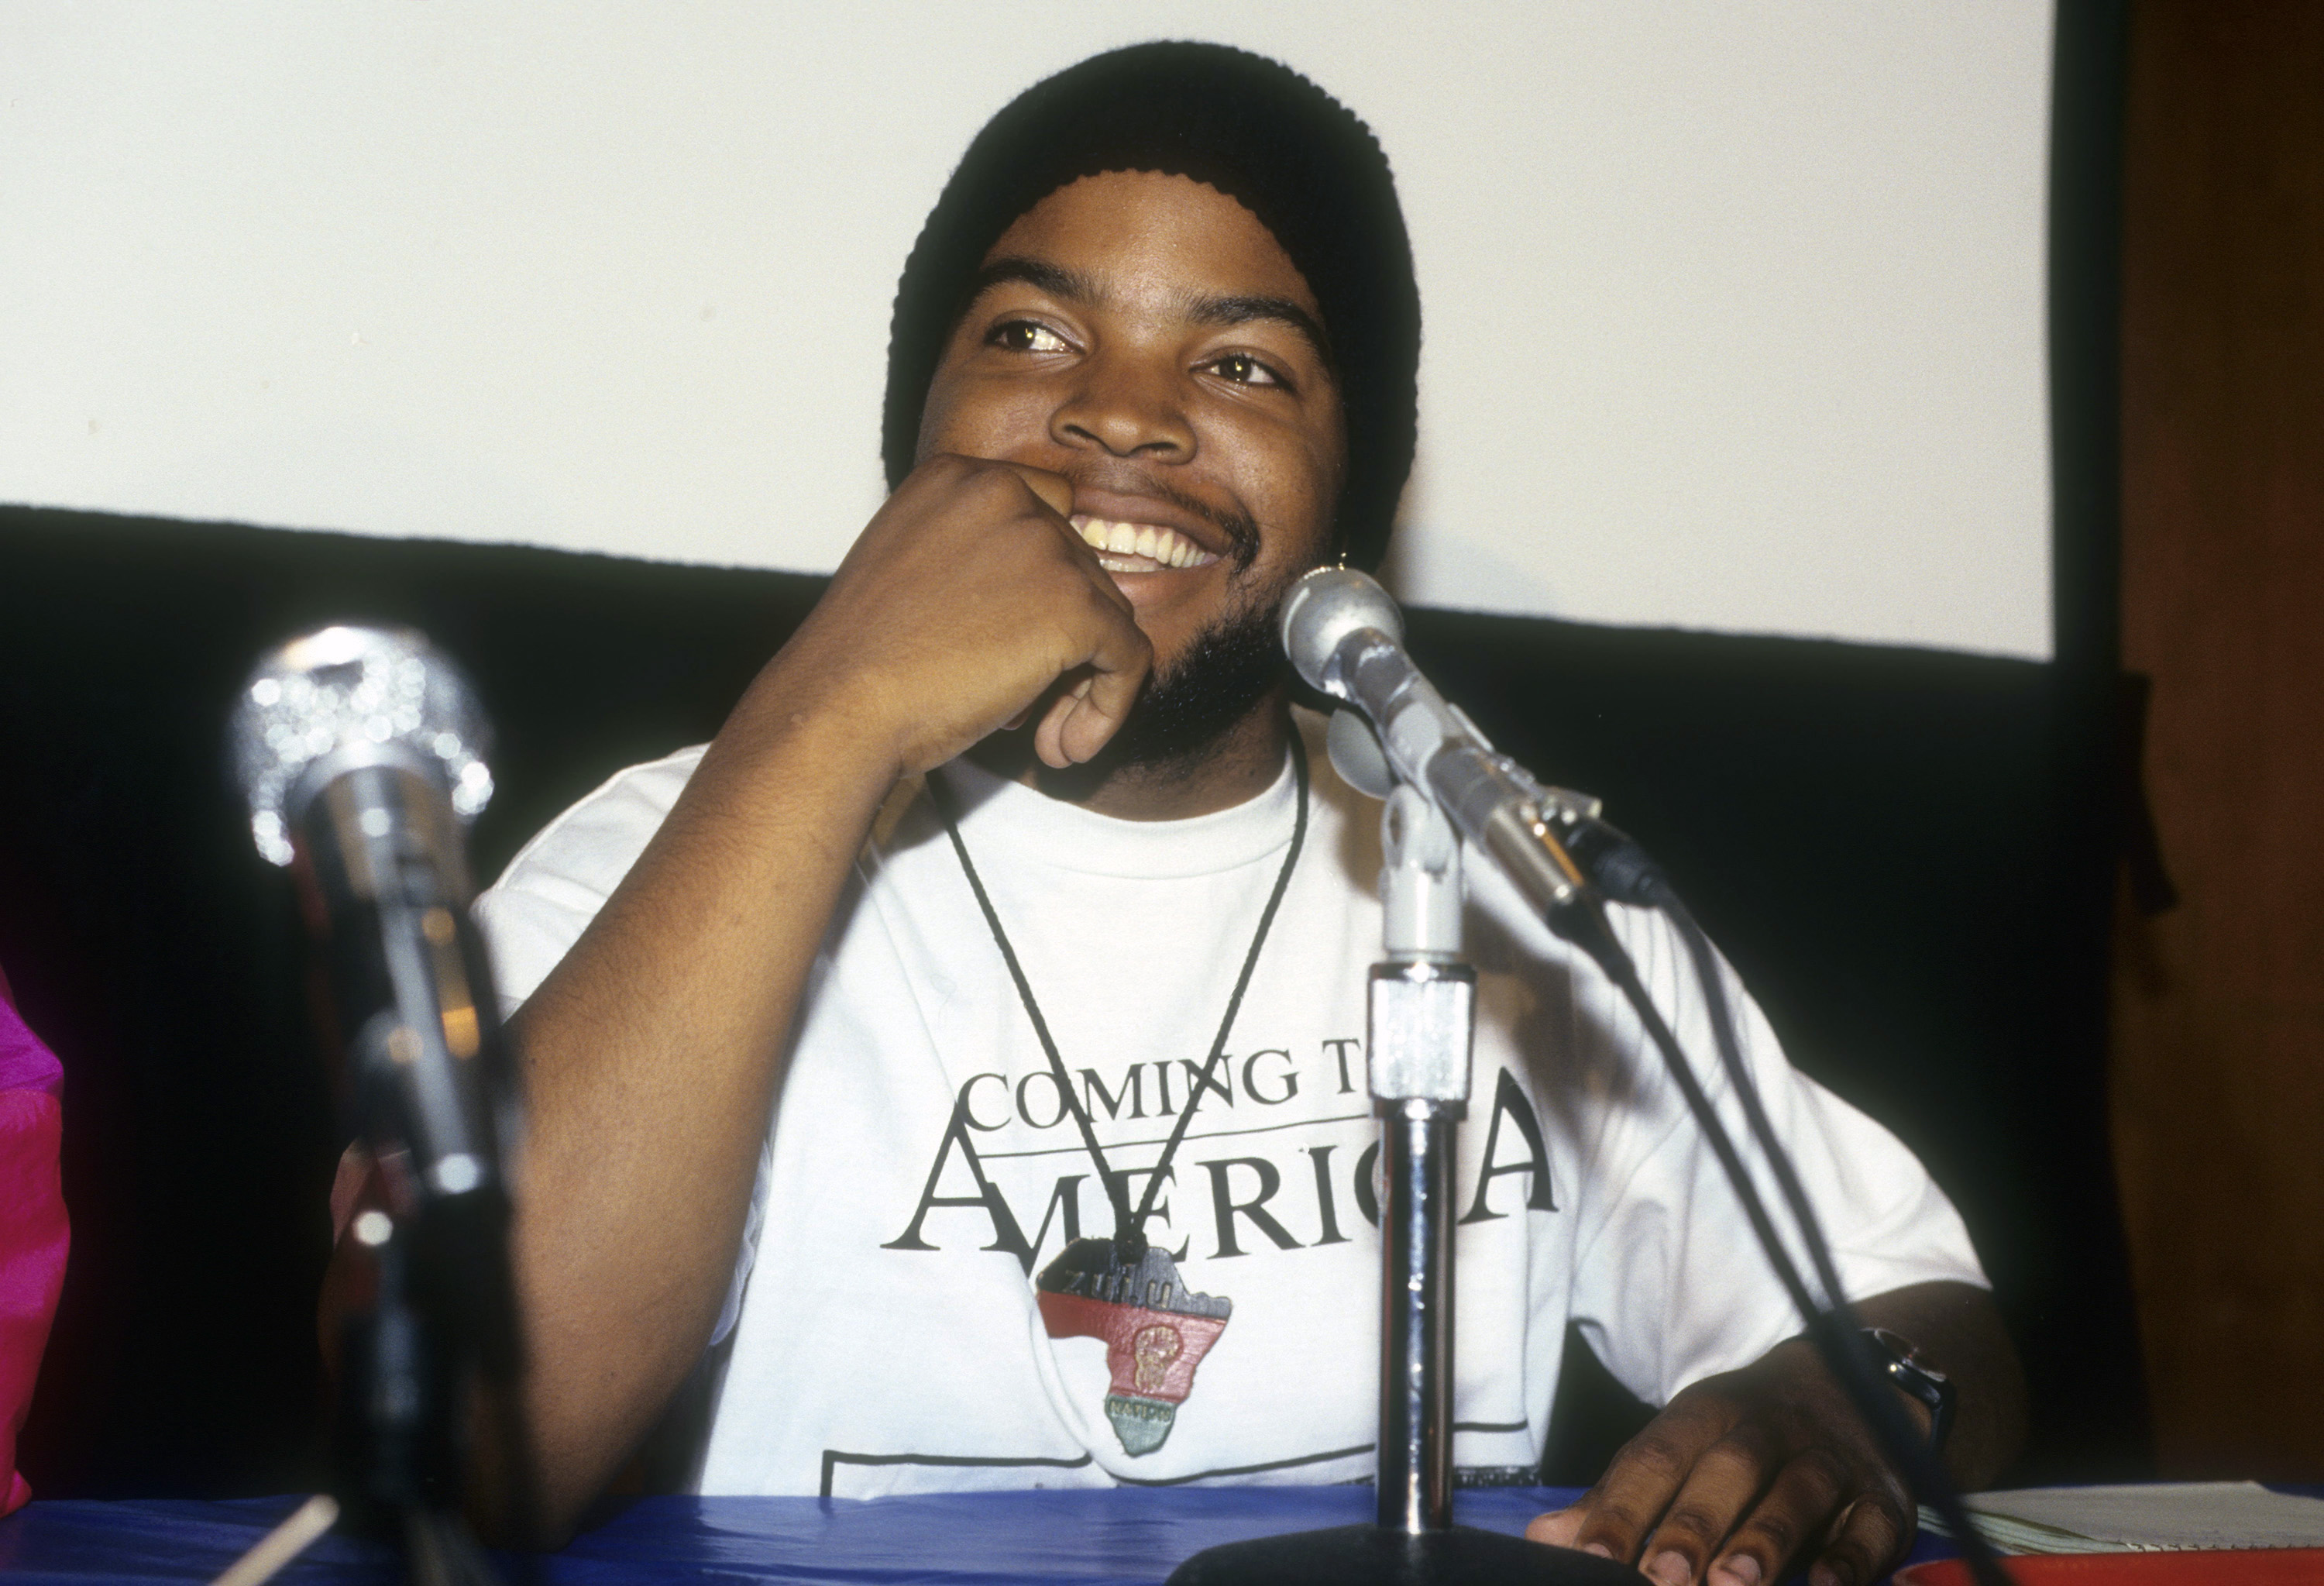 Ice Cube wearing a necklace shaped like Africa